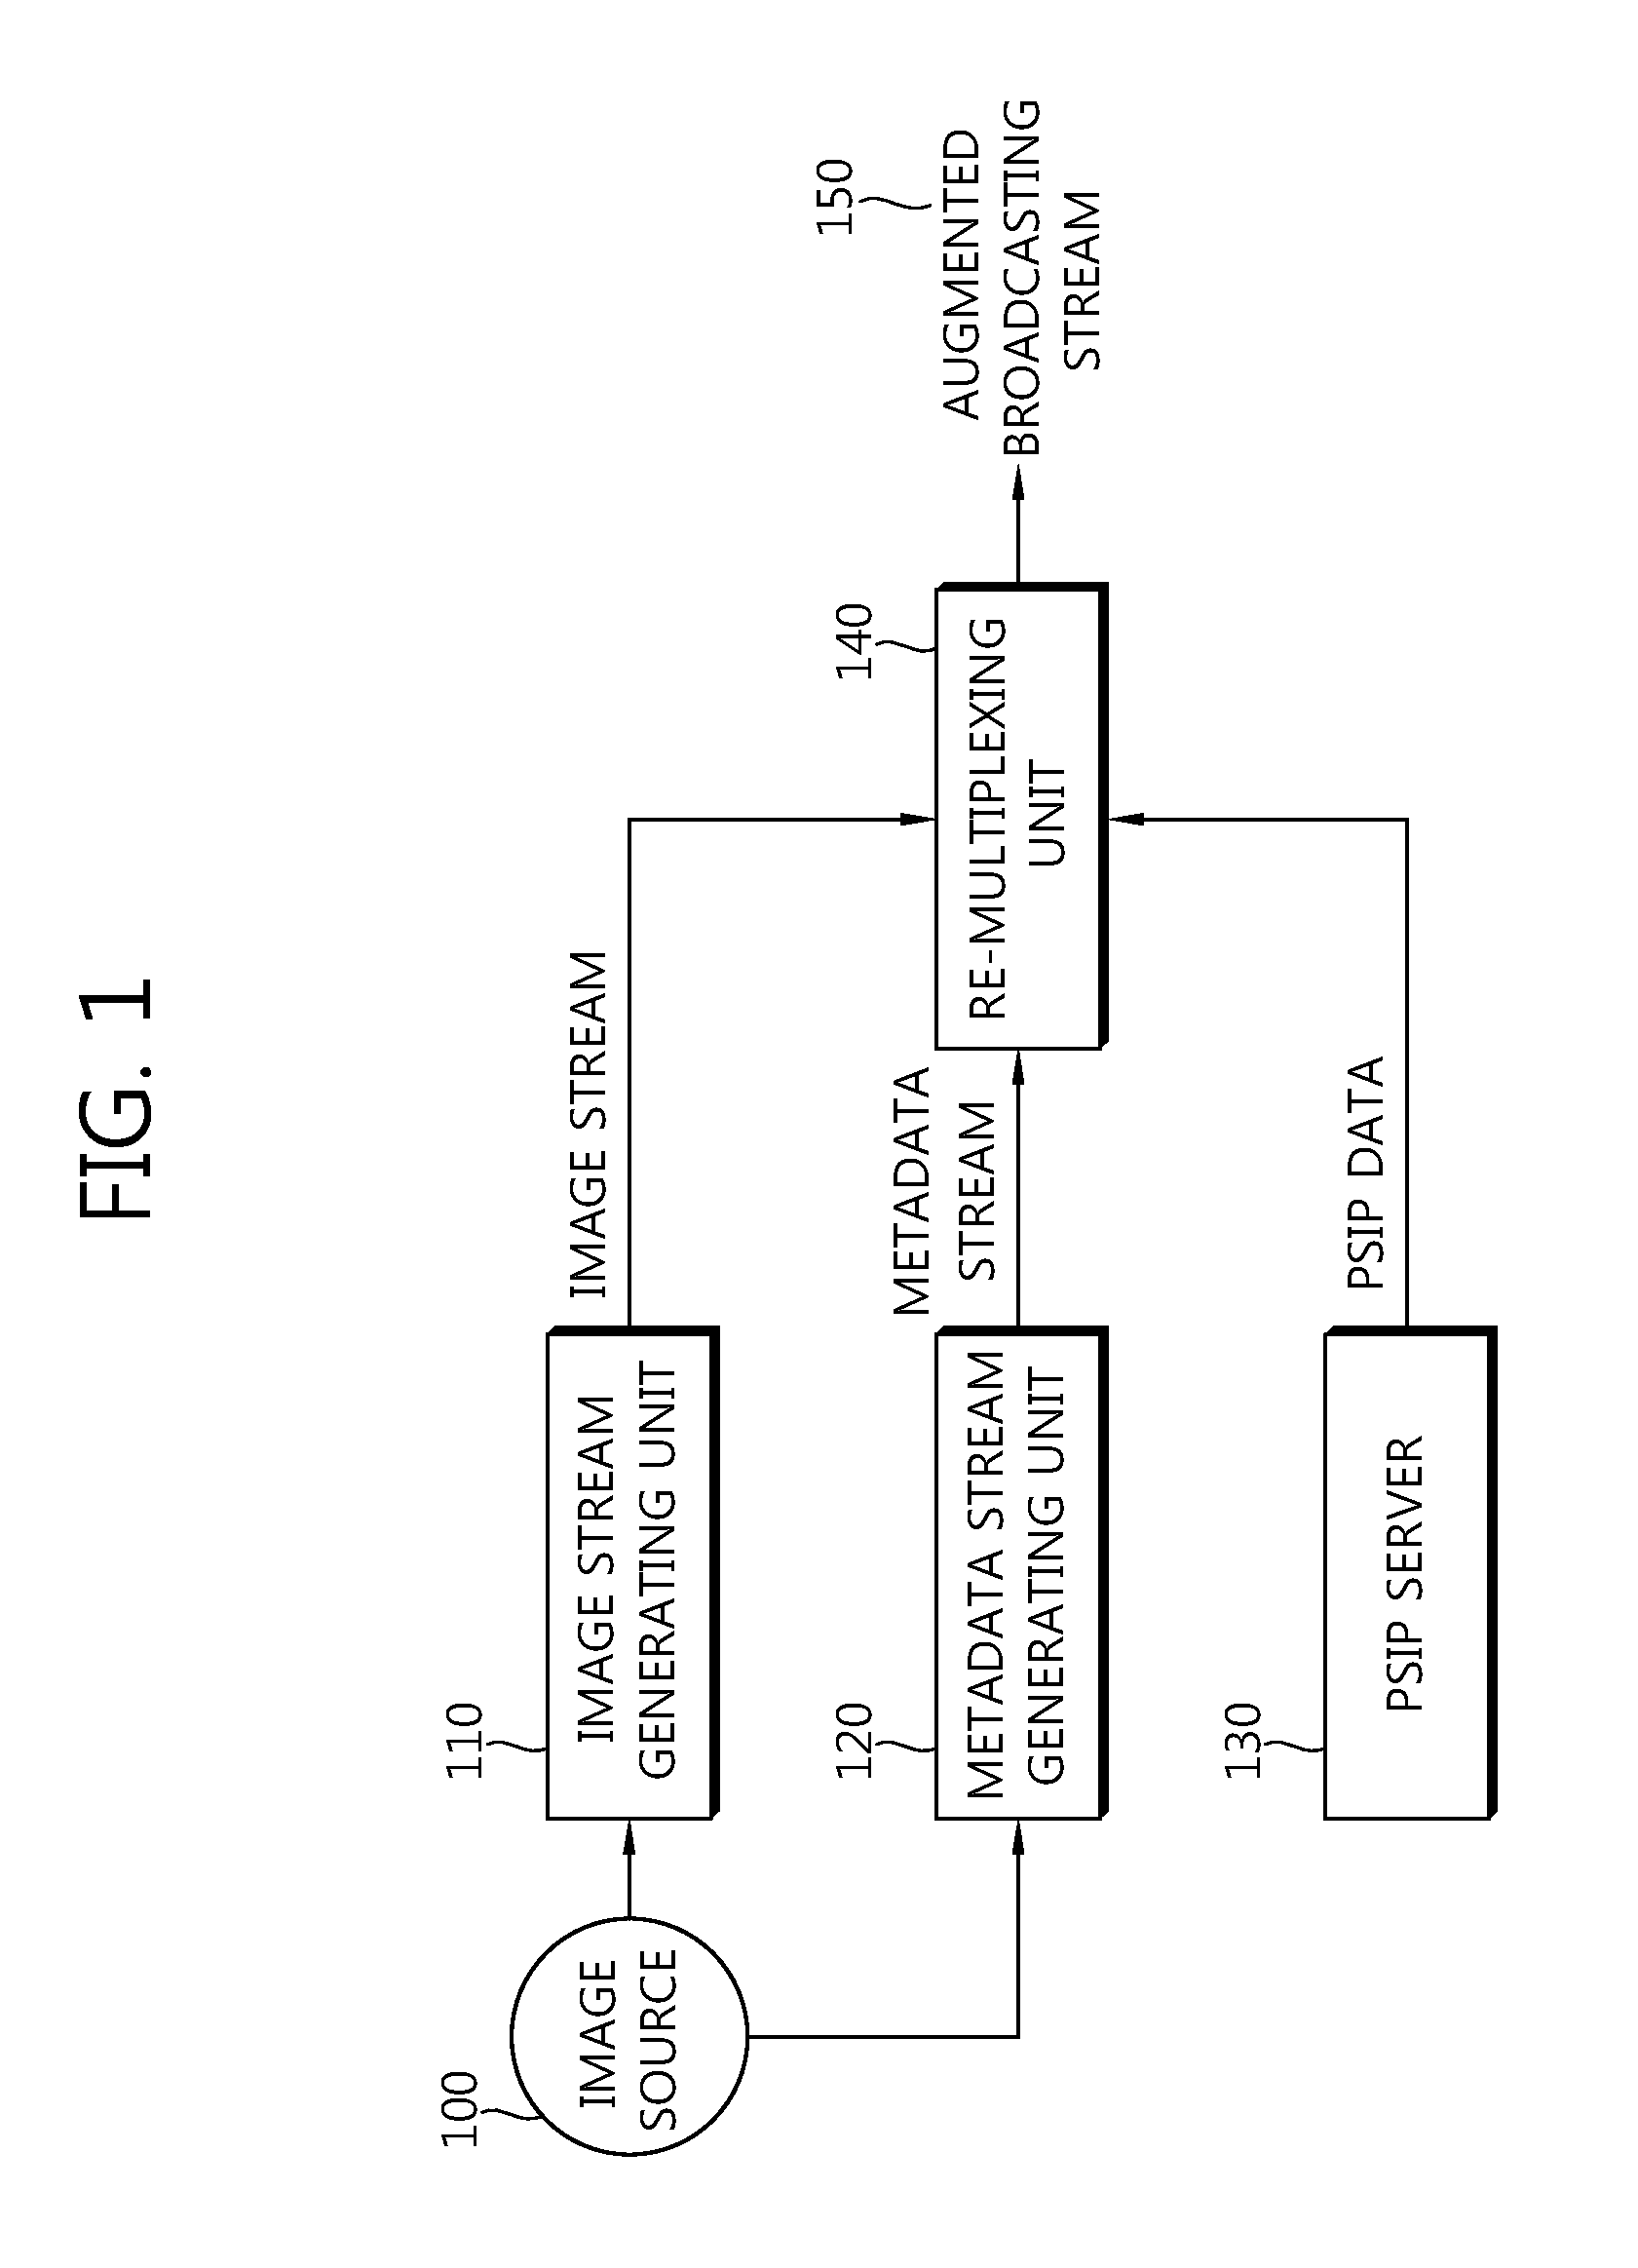 Augmented broadcasting stream transmission device and method, and augmented broadcasting service providing device and method